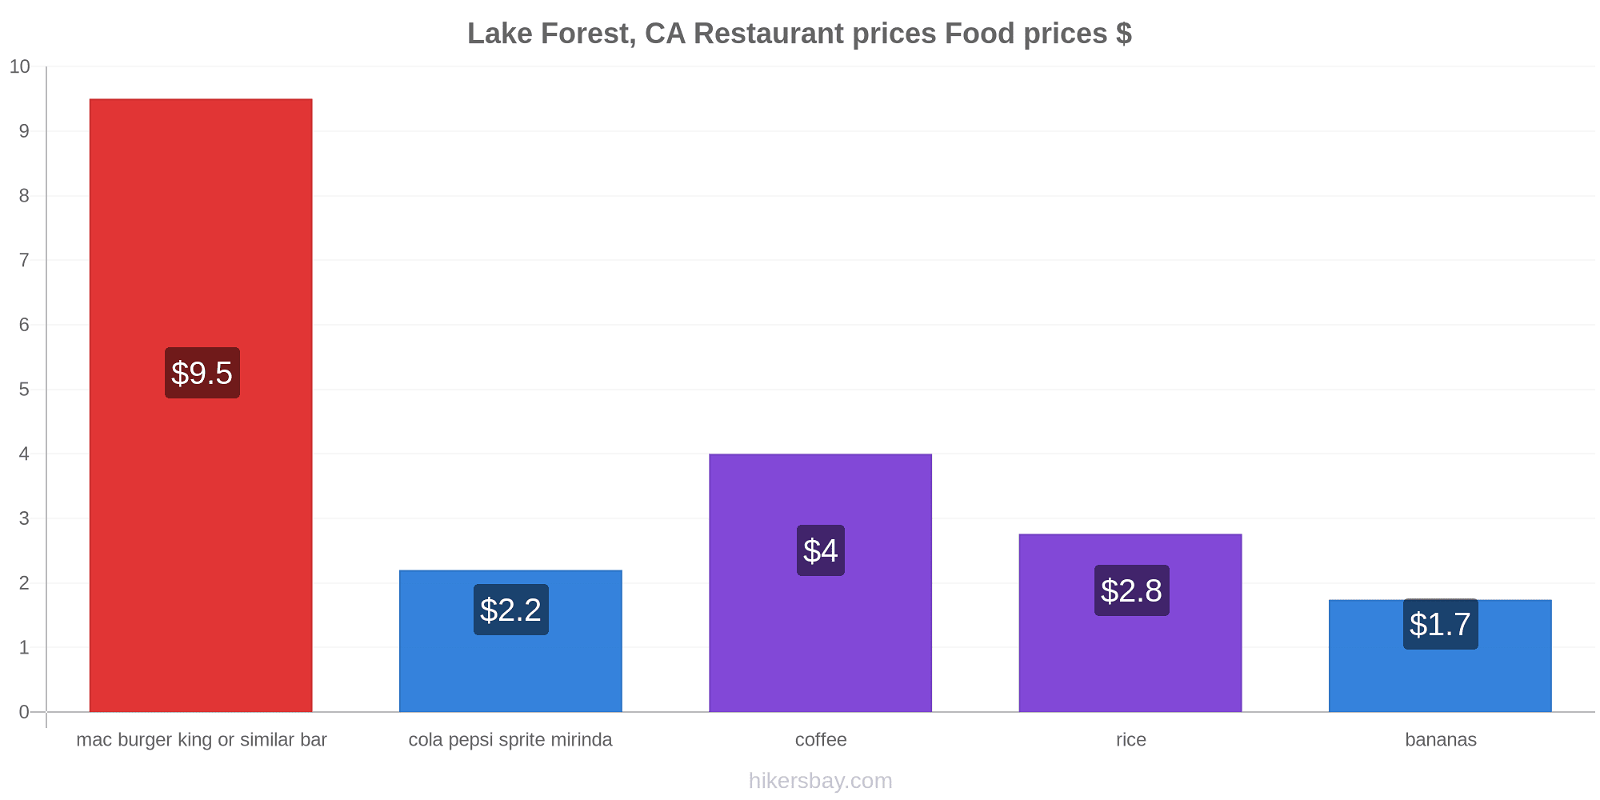 Lake Forest, CA price changes hikersbay.com